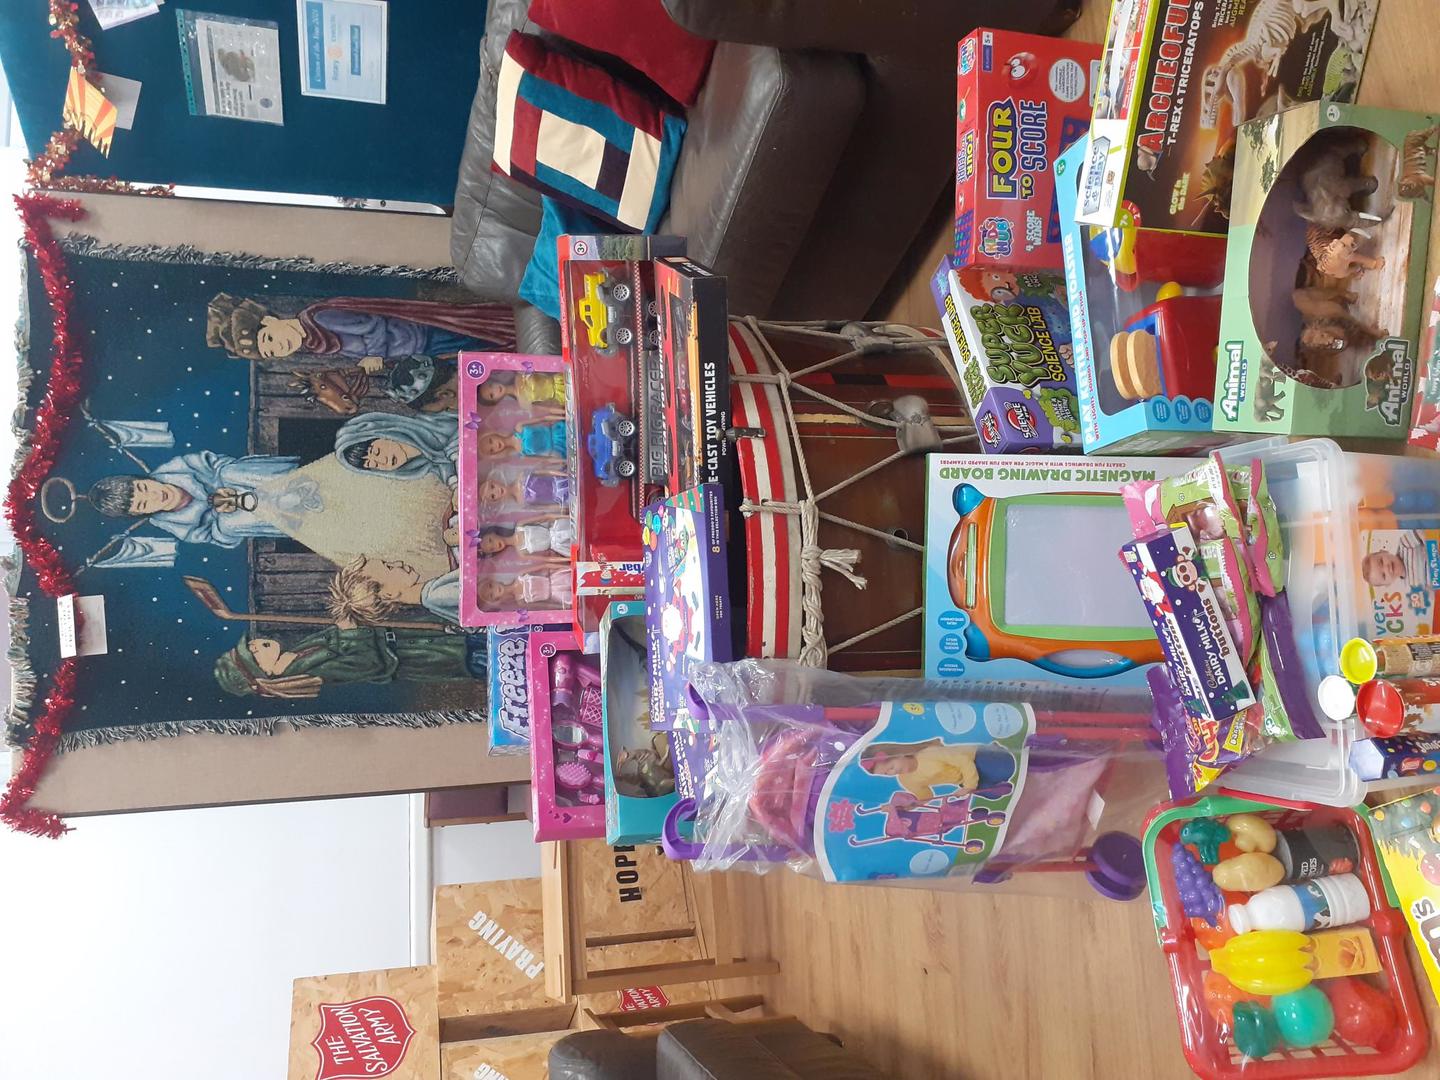 Just a small display of donated gifts